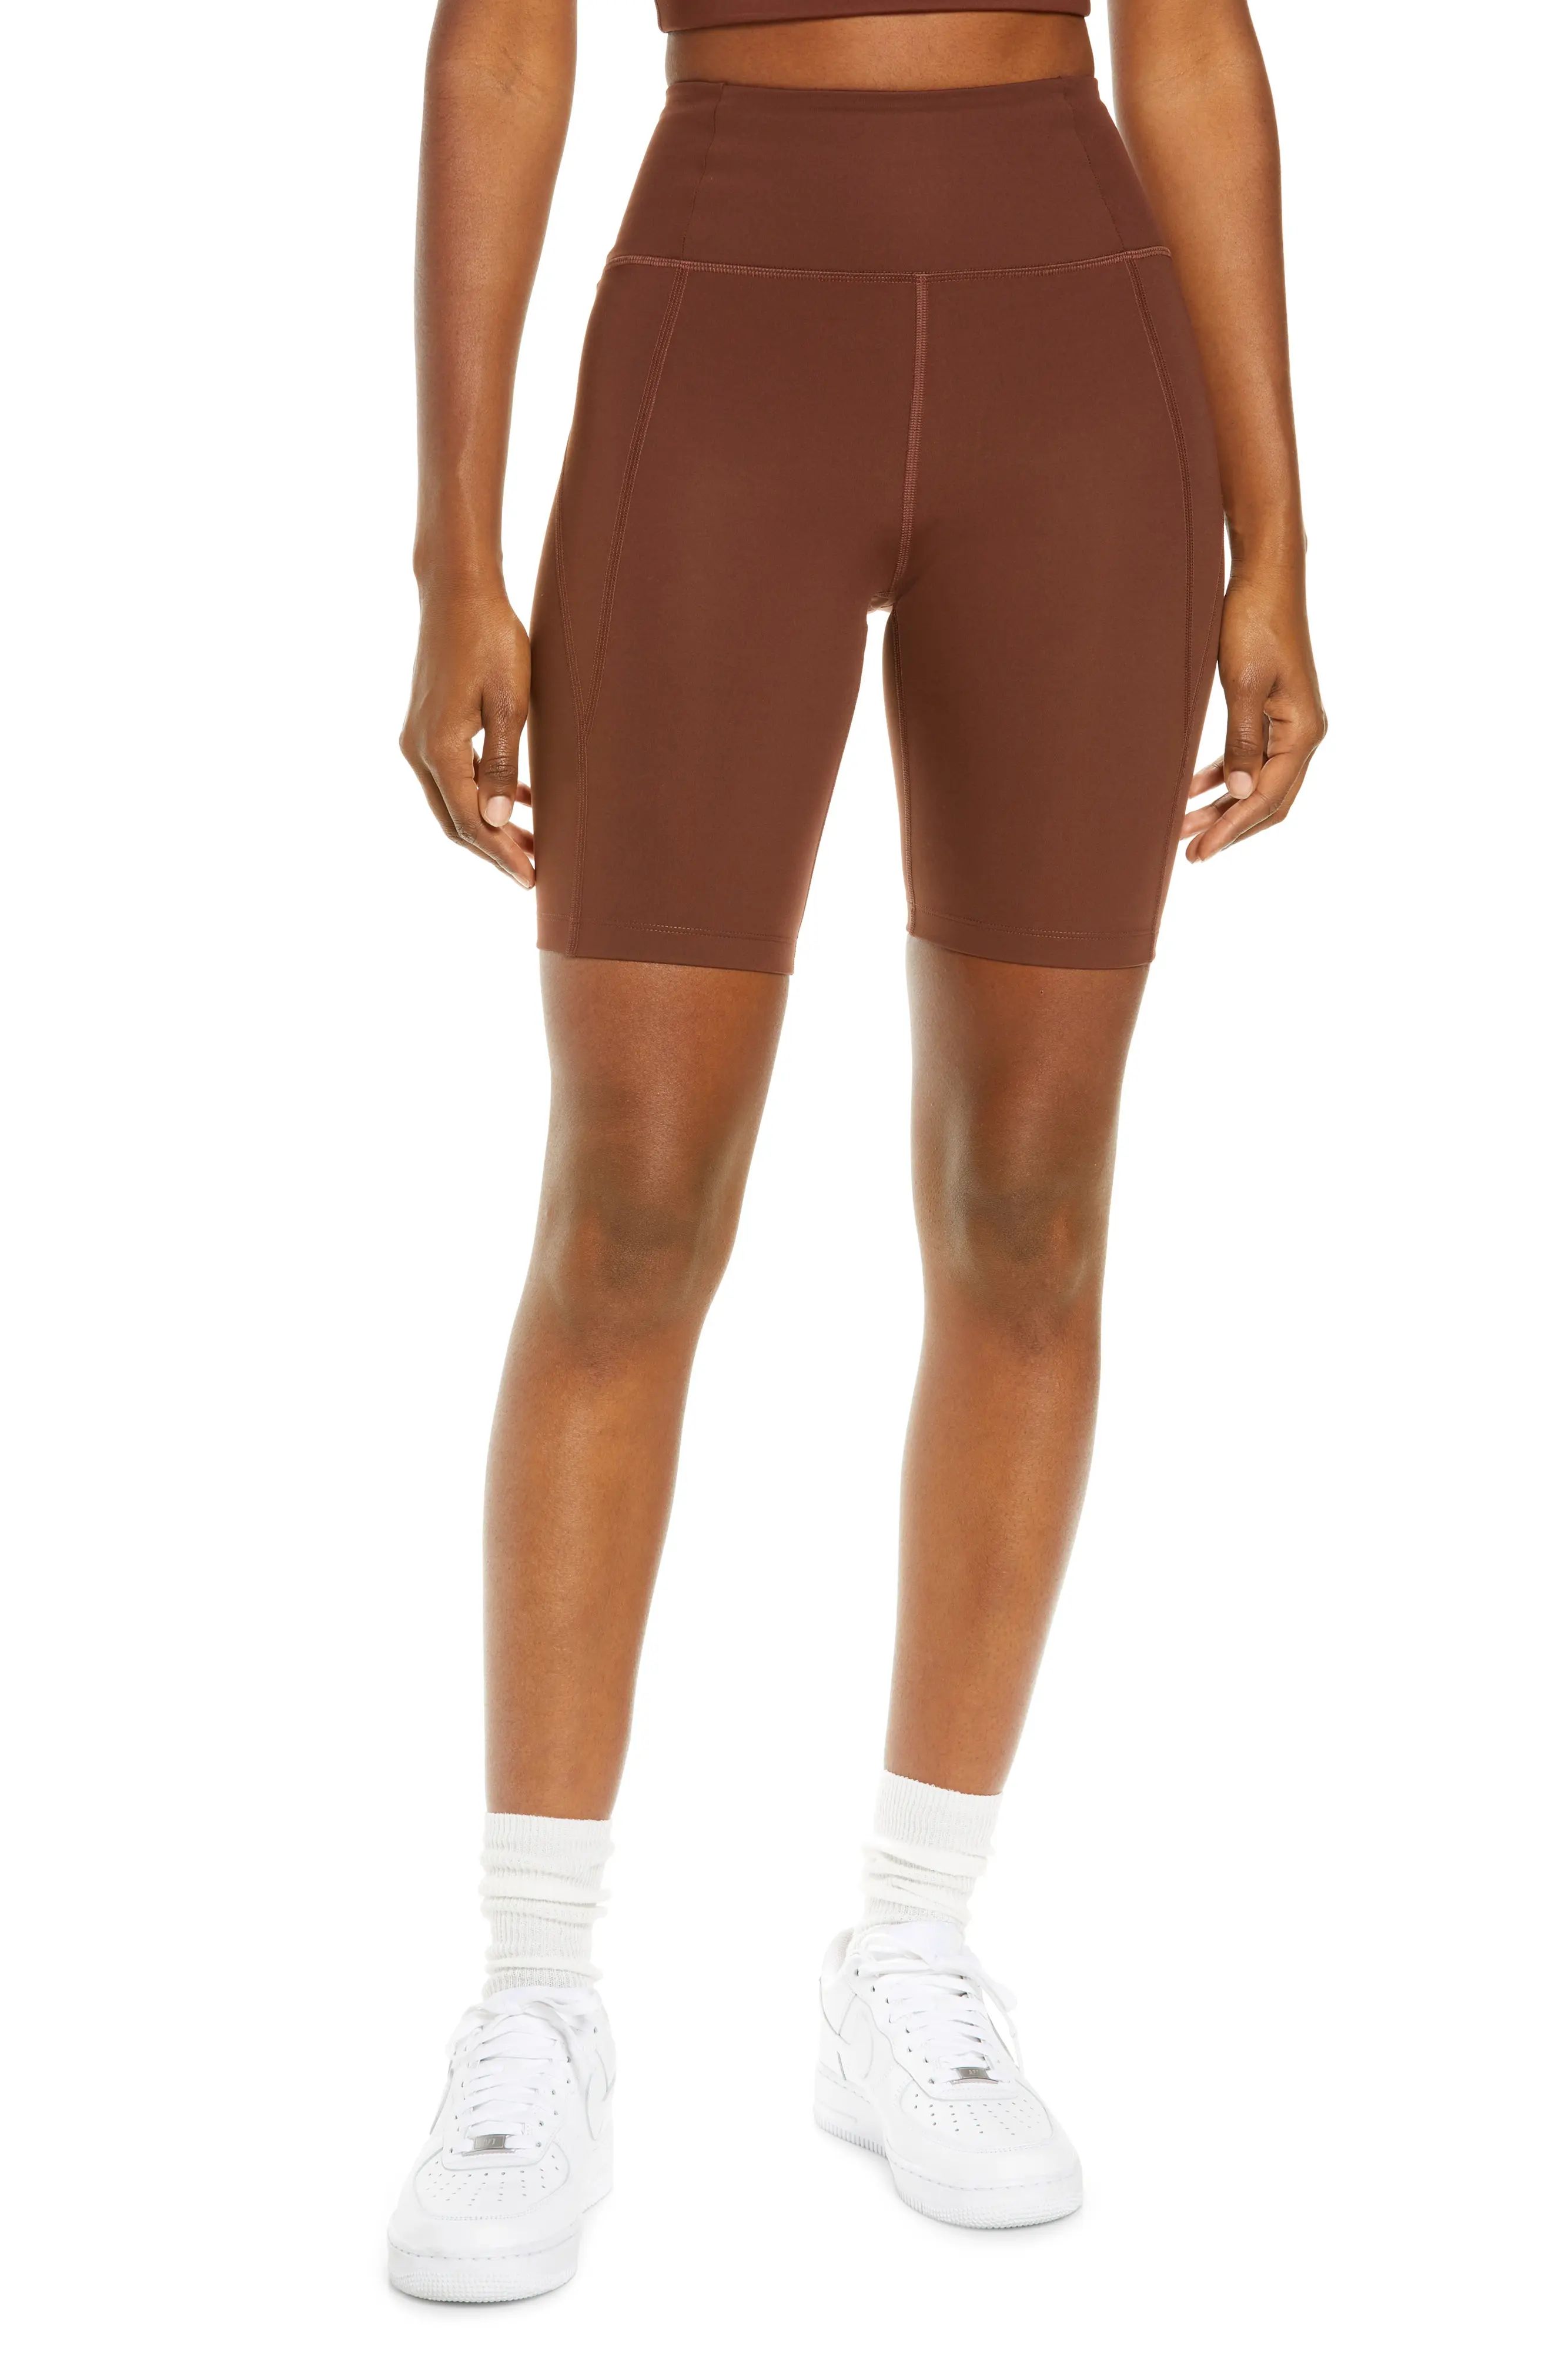 Girlfriend Collective High Waist Bike Shorts, Size Small in Earth at Nordstrom | Nordstrom